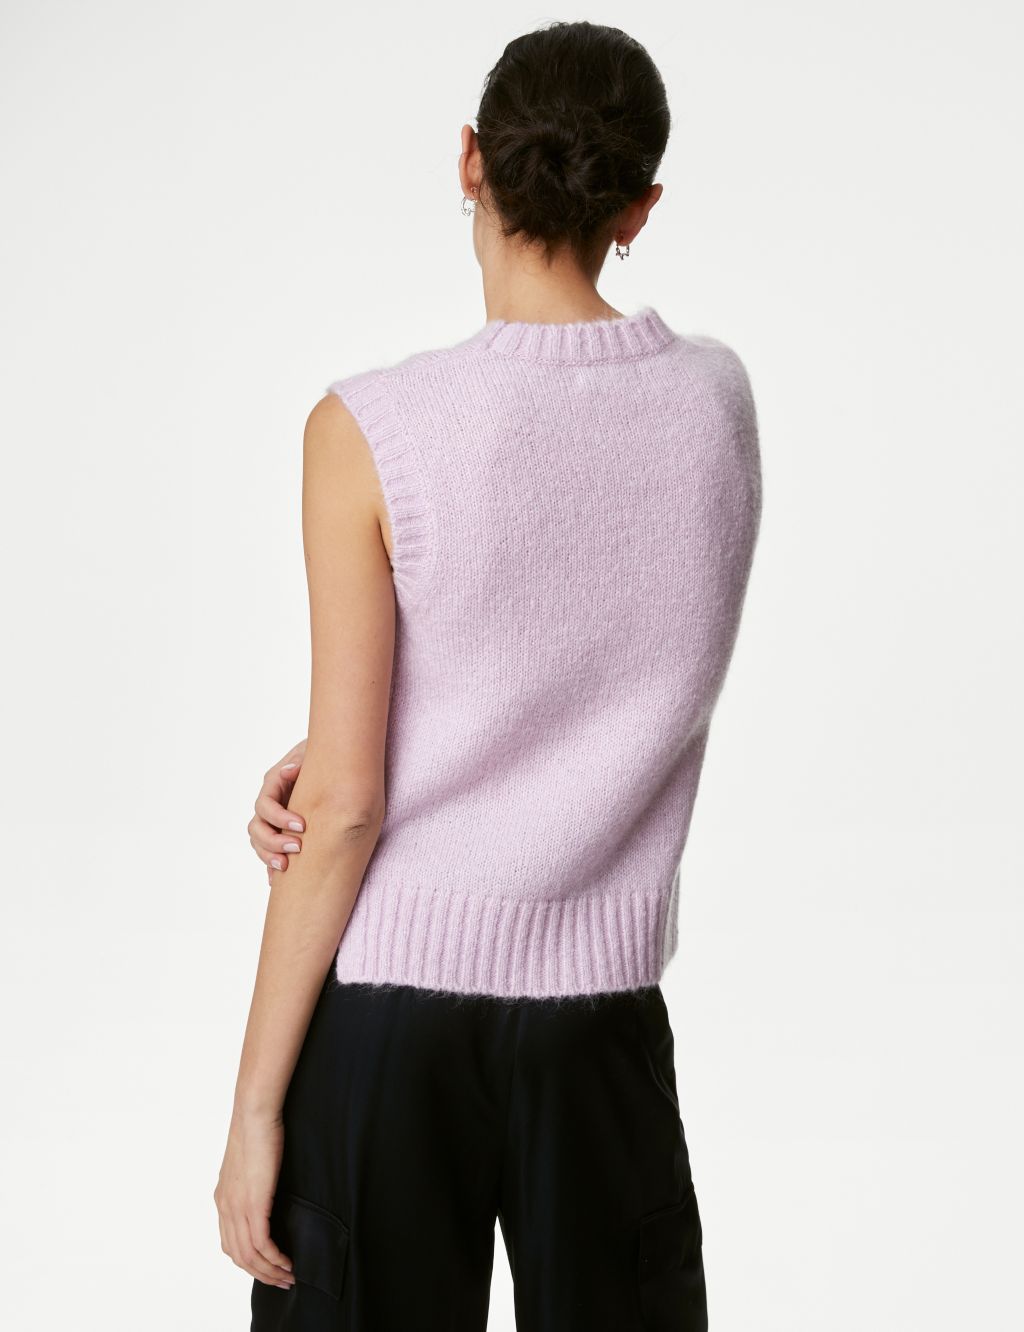 Crew Neck Knitted Jumper Vest with Mohair image 5